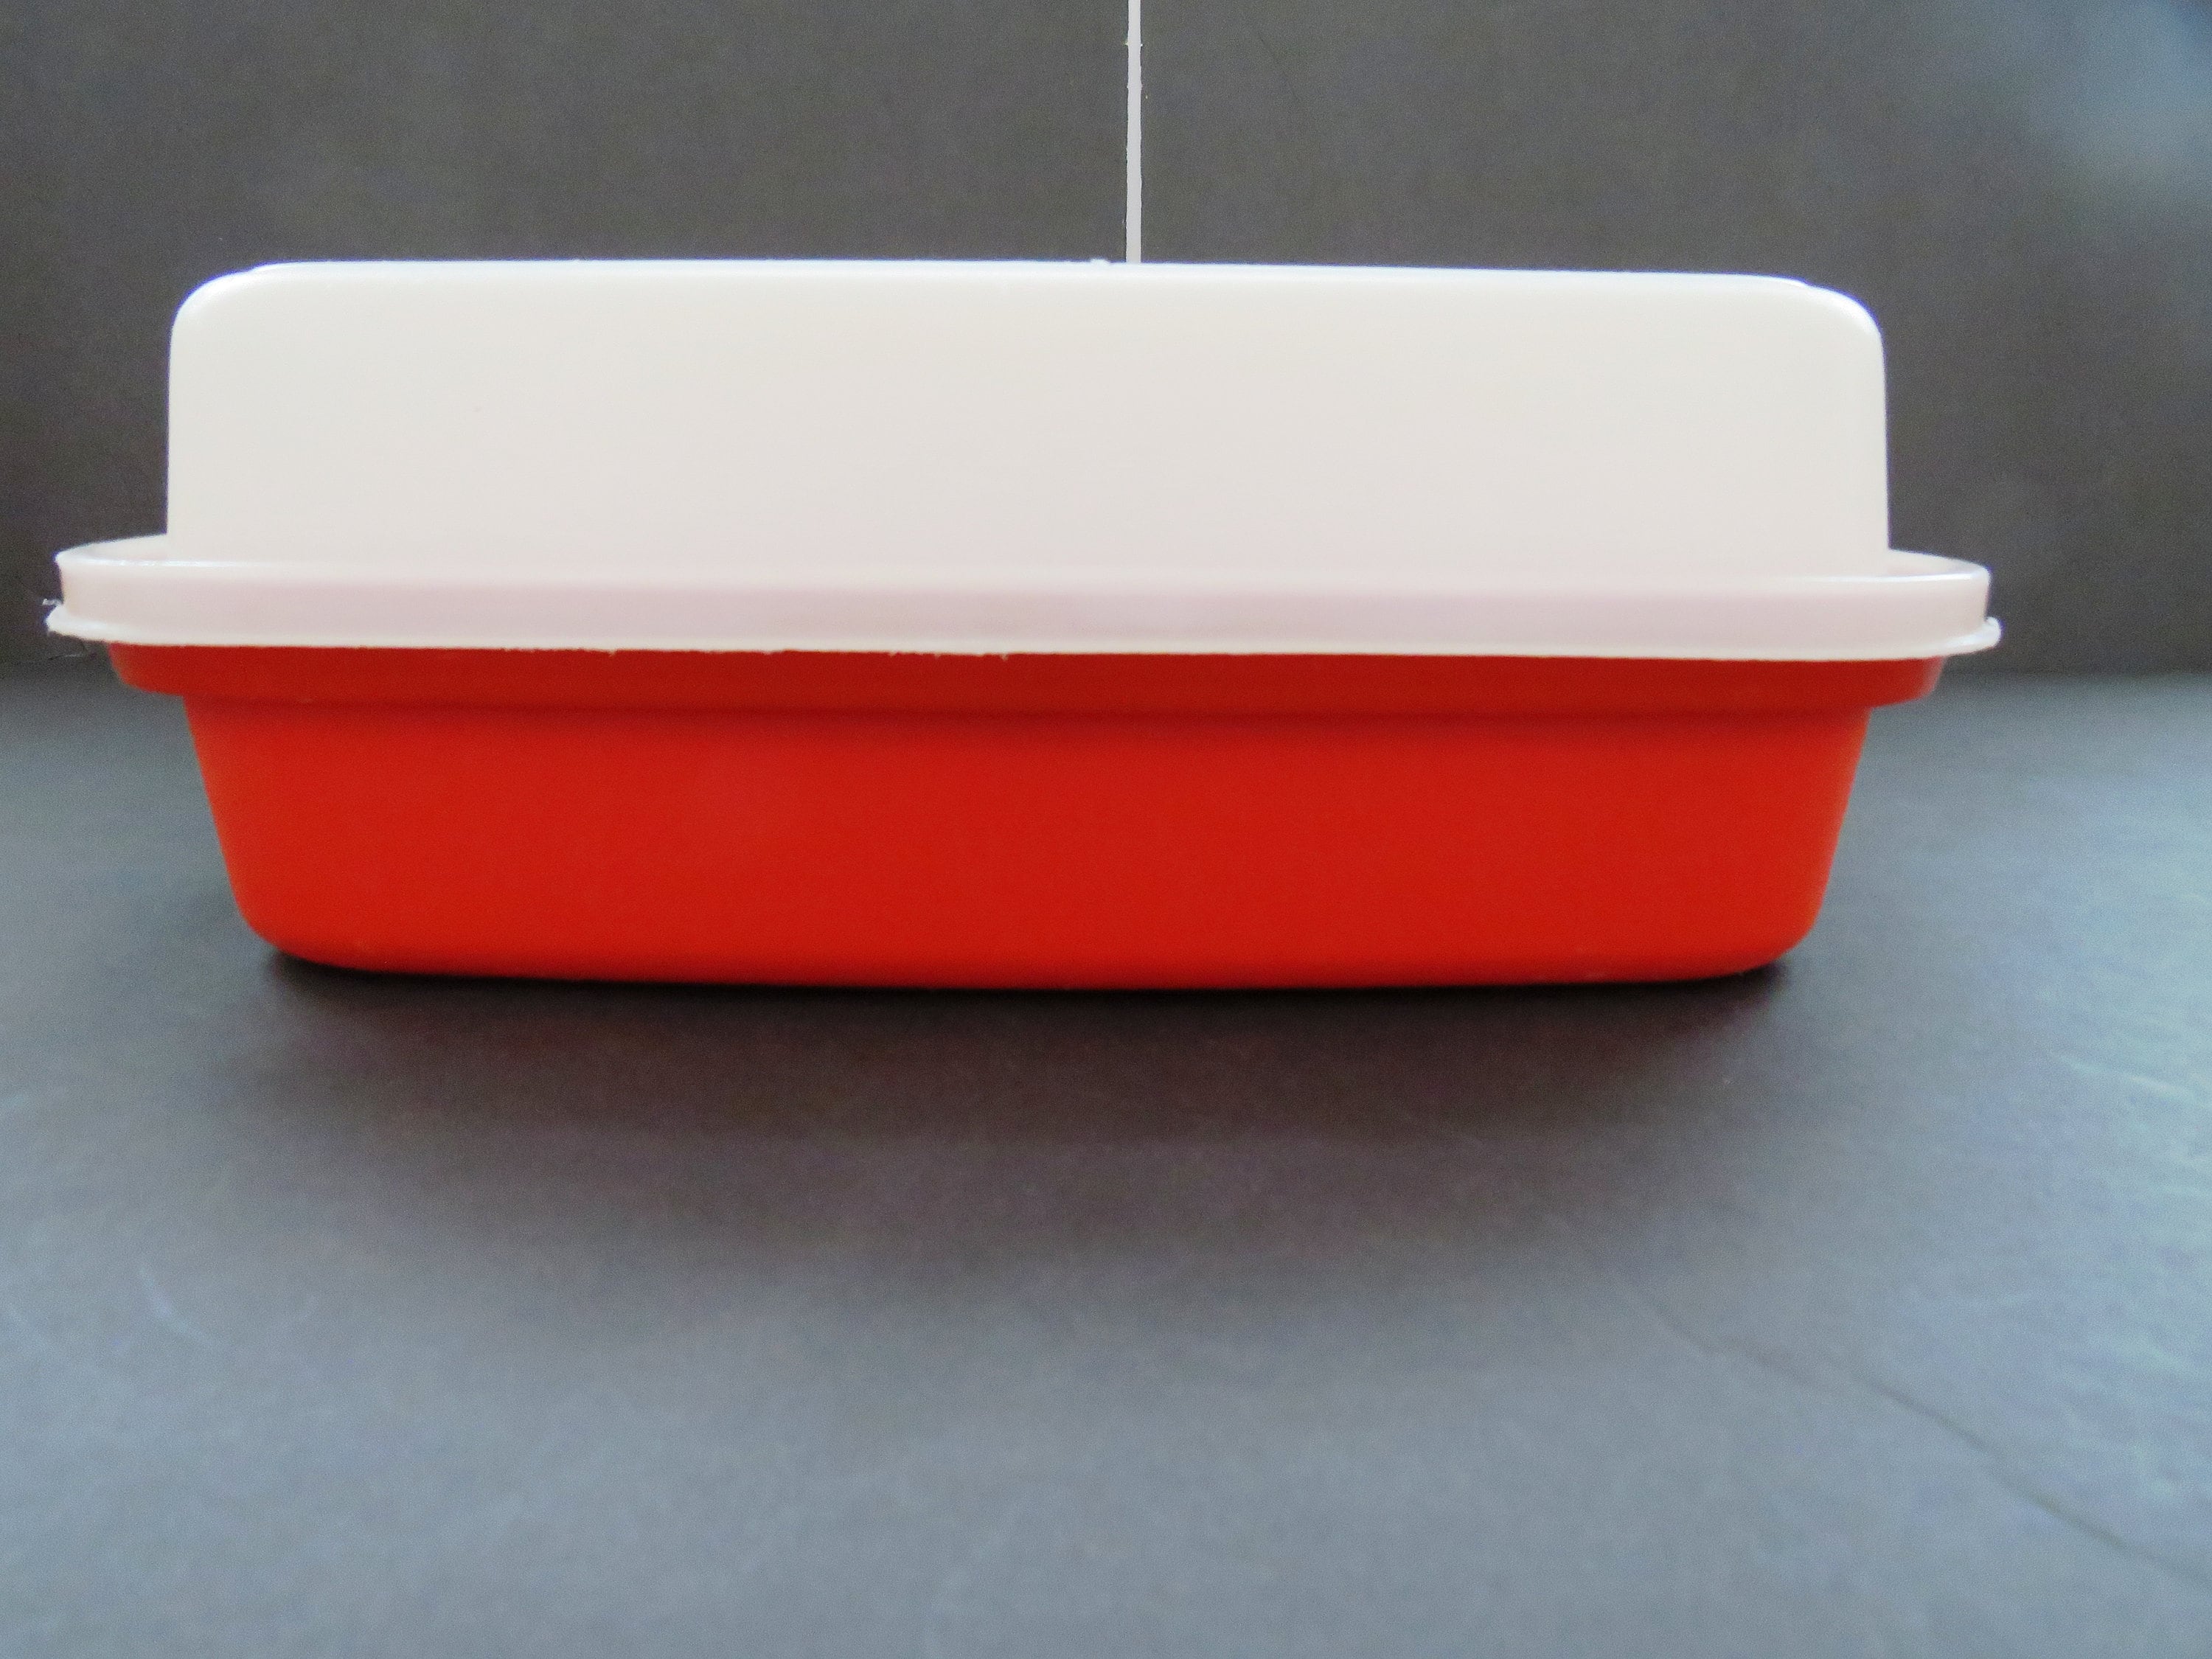 NEW Tupperware FULL SIZE LARGE SEASON SERVE MARINADE CONTAINER